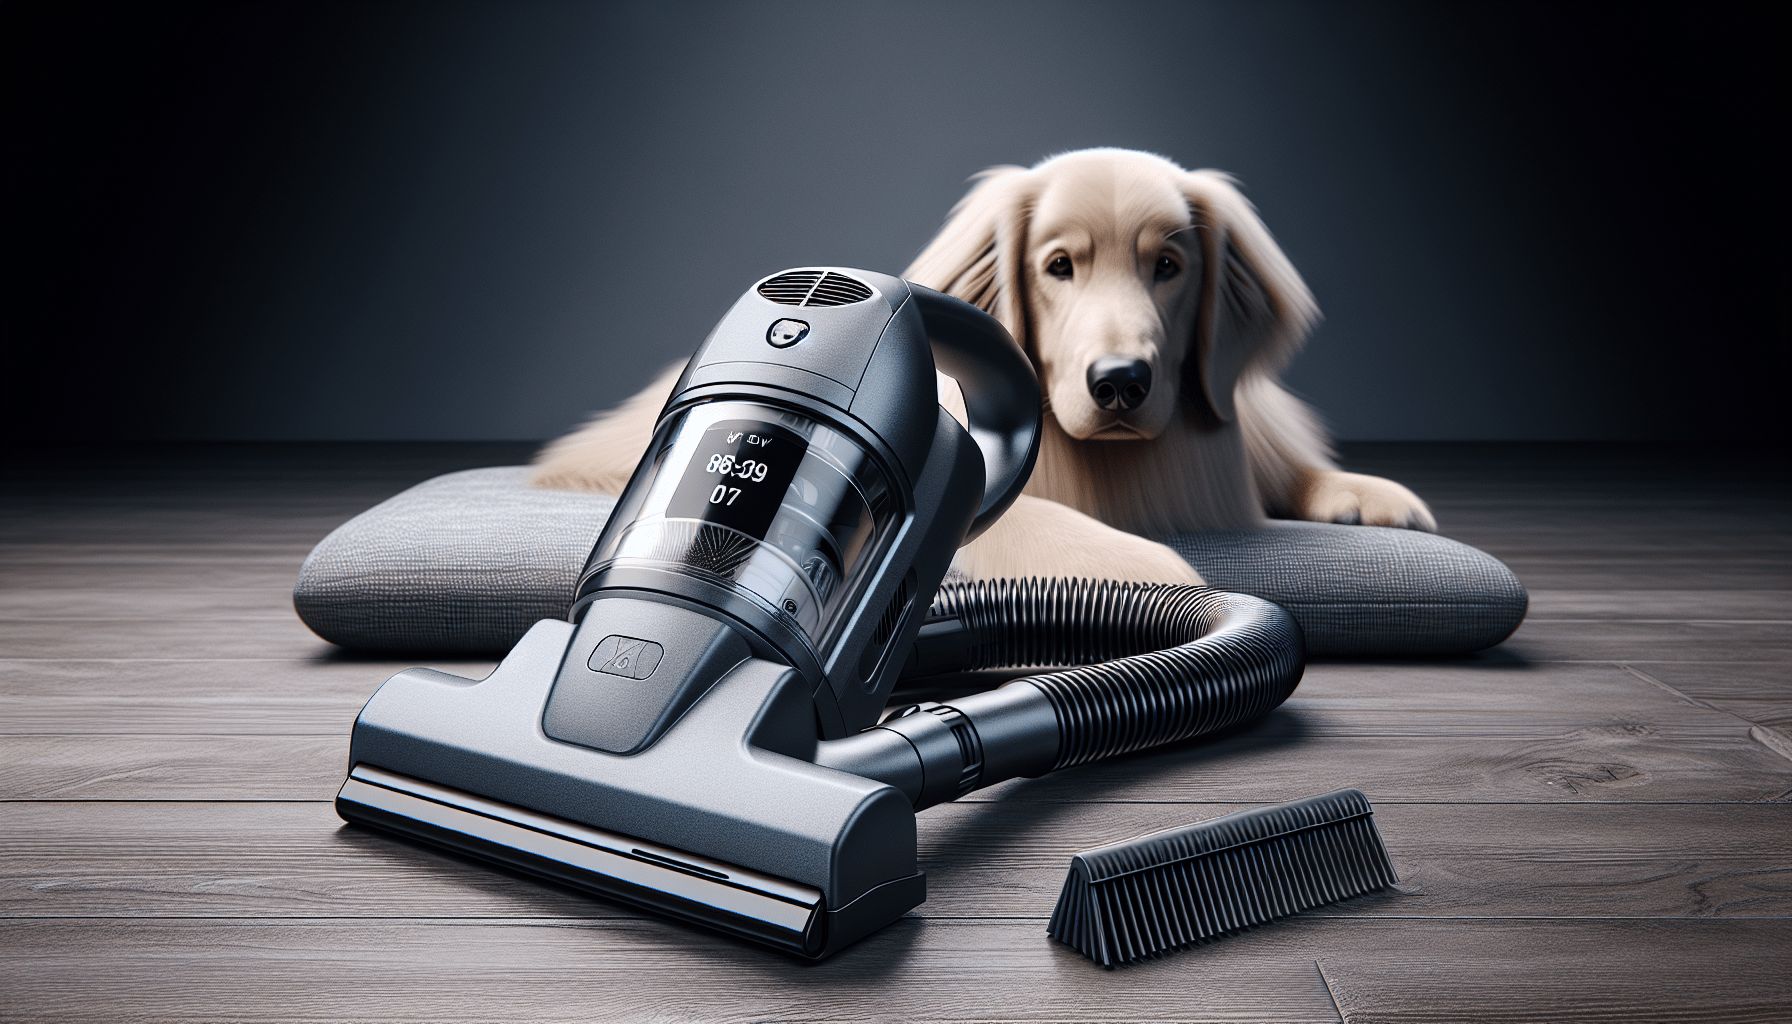 What Is The Best Portable Vacuum Cleaner For Dog Hair?